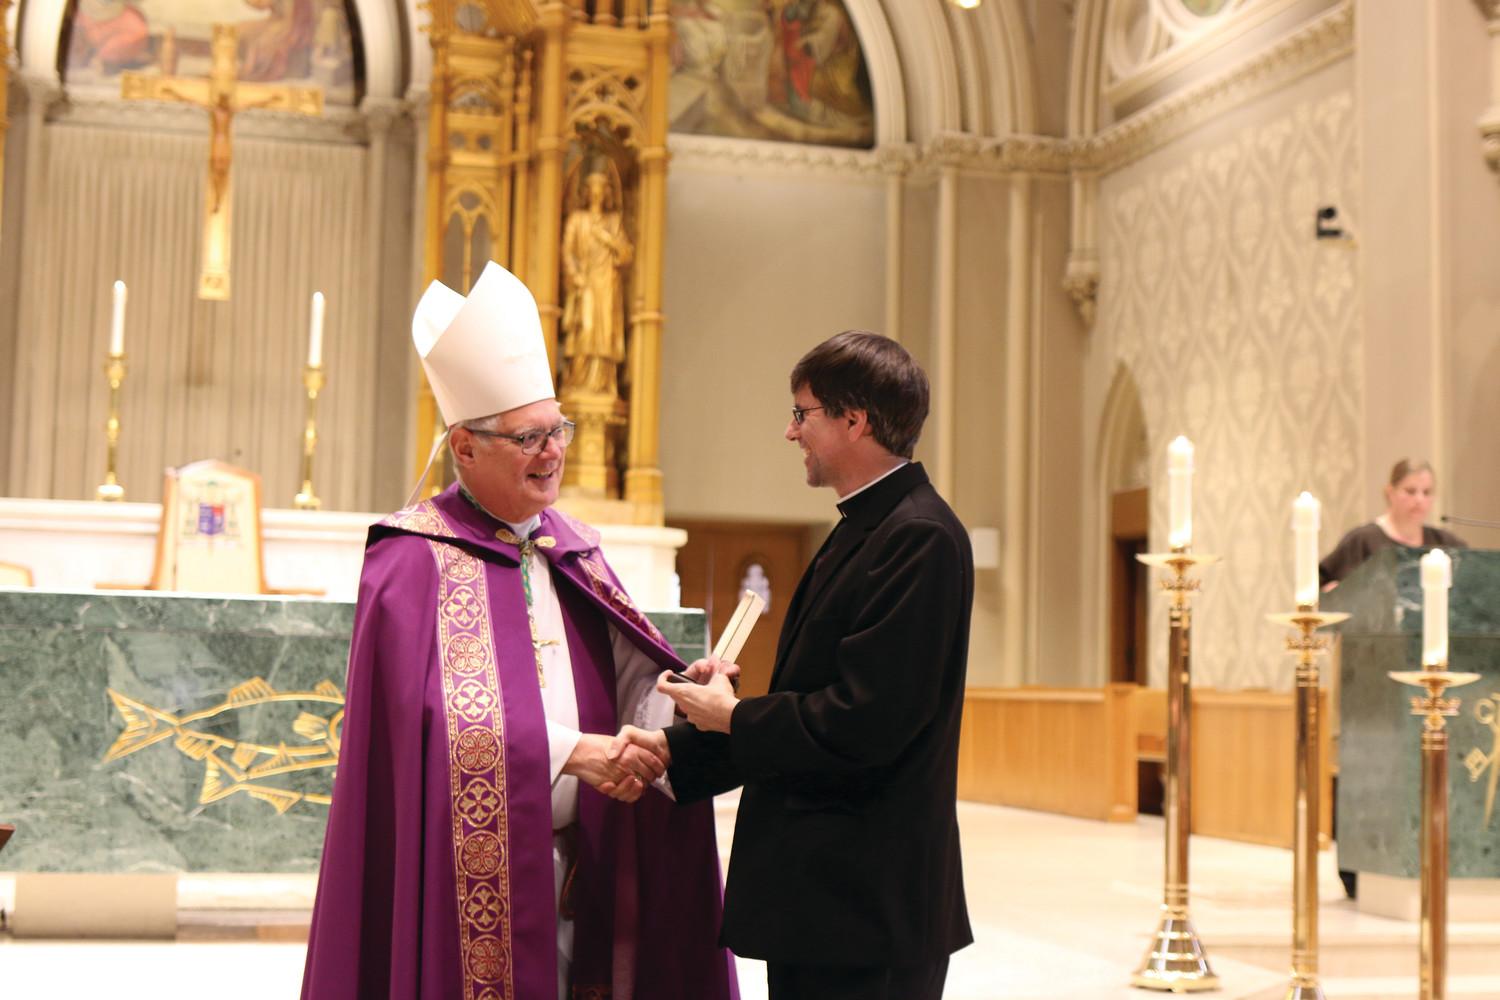 Bishop Thomas J. Tobin presents awards at the Diocesan Catholic Youth Ministry and Scout Awards celebration on Sunday, March 11, at the Cathedral of Saints Peter and Paul in Providence. Pictured: Father Michael Woolley, pastor of St. Joseph Church in Woonsocket, for his work at the Father Marot CYO Center.